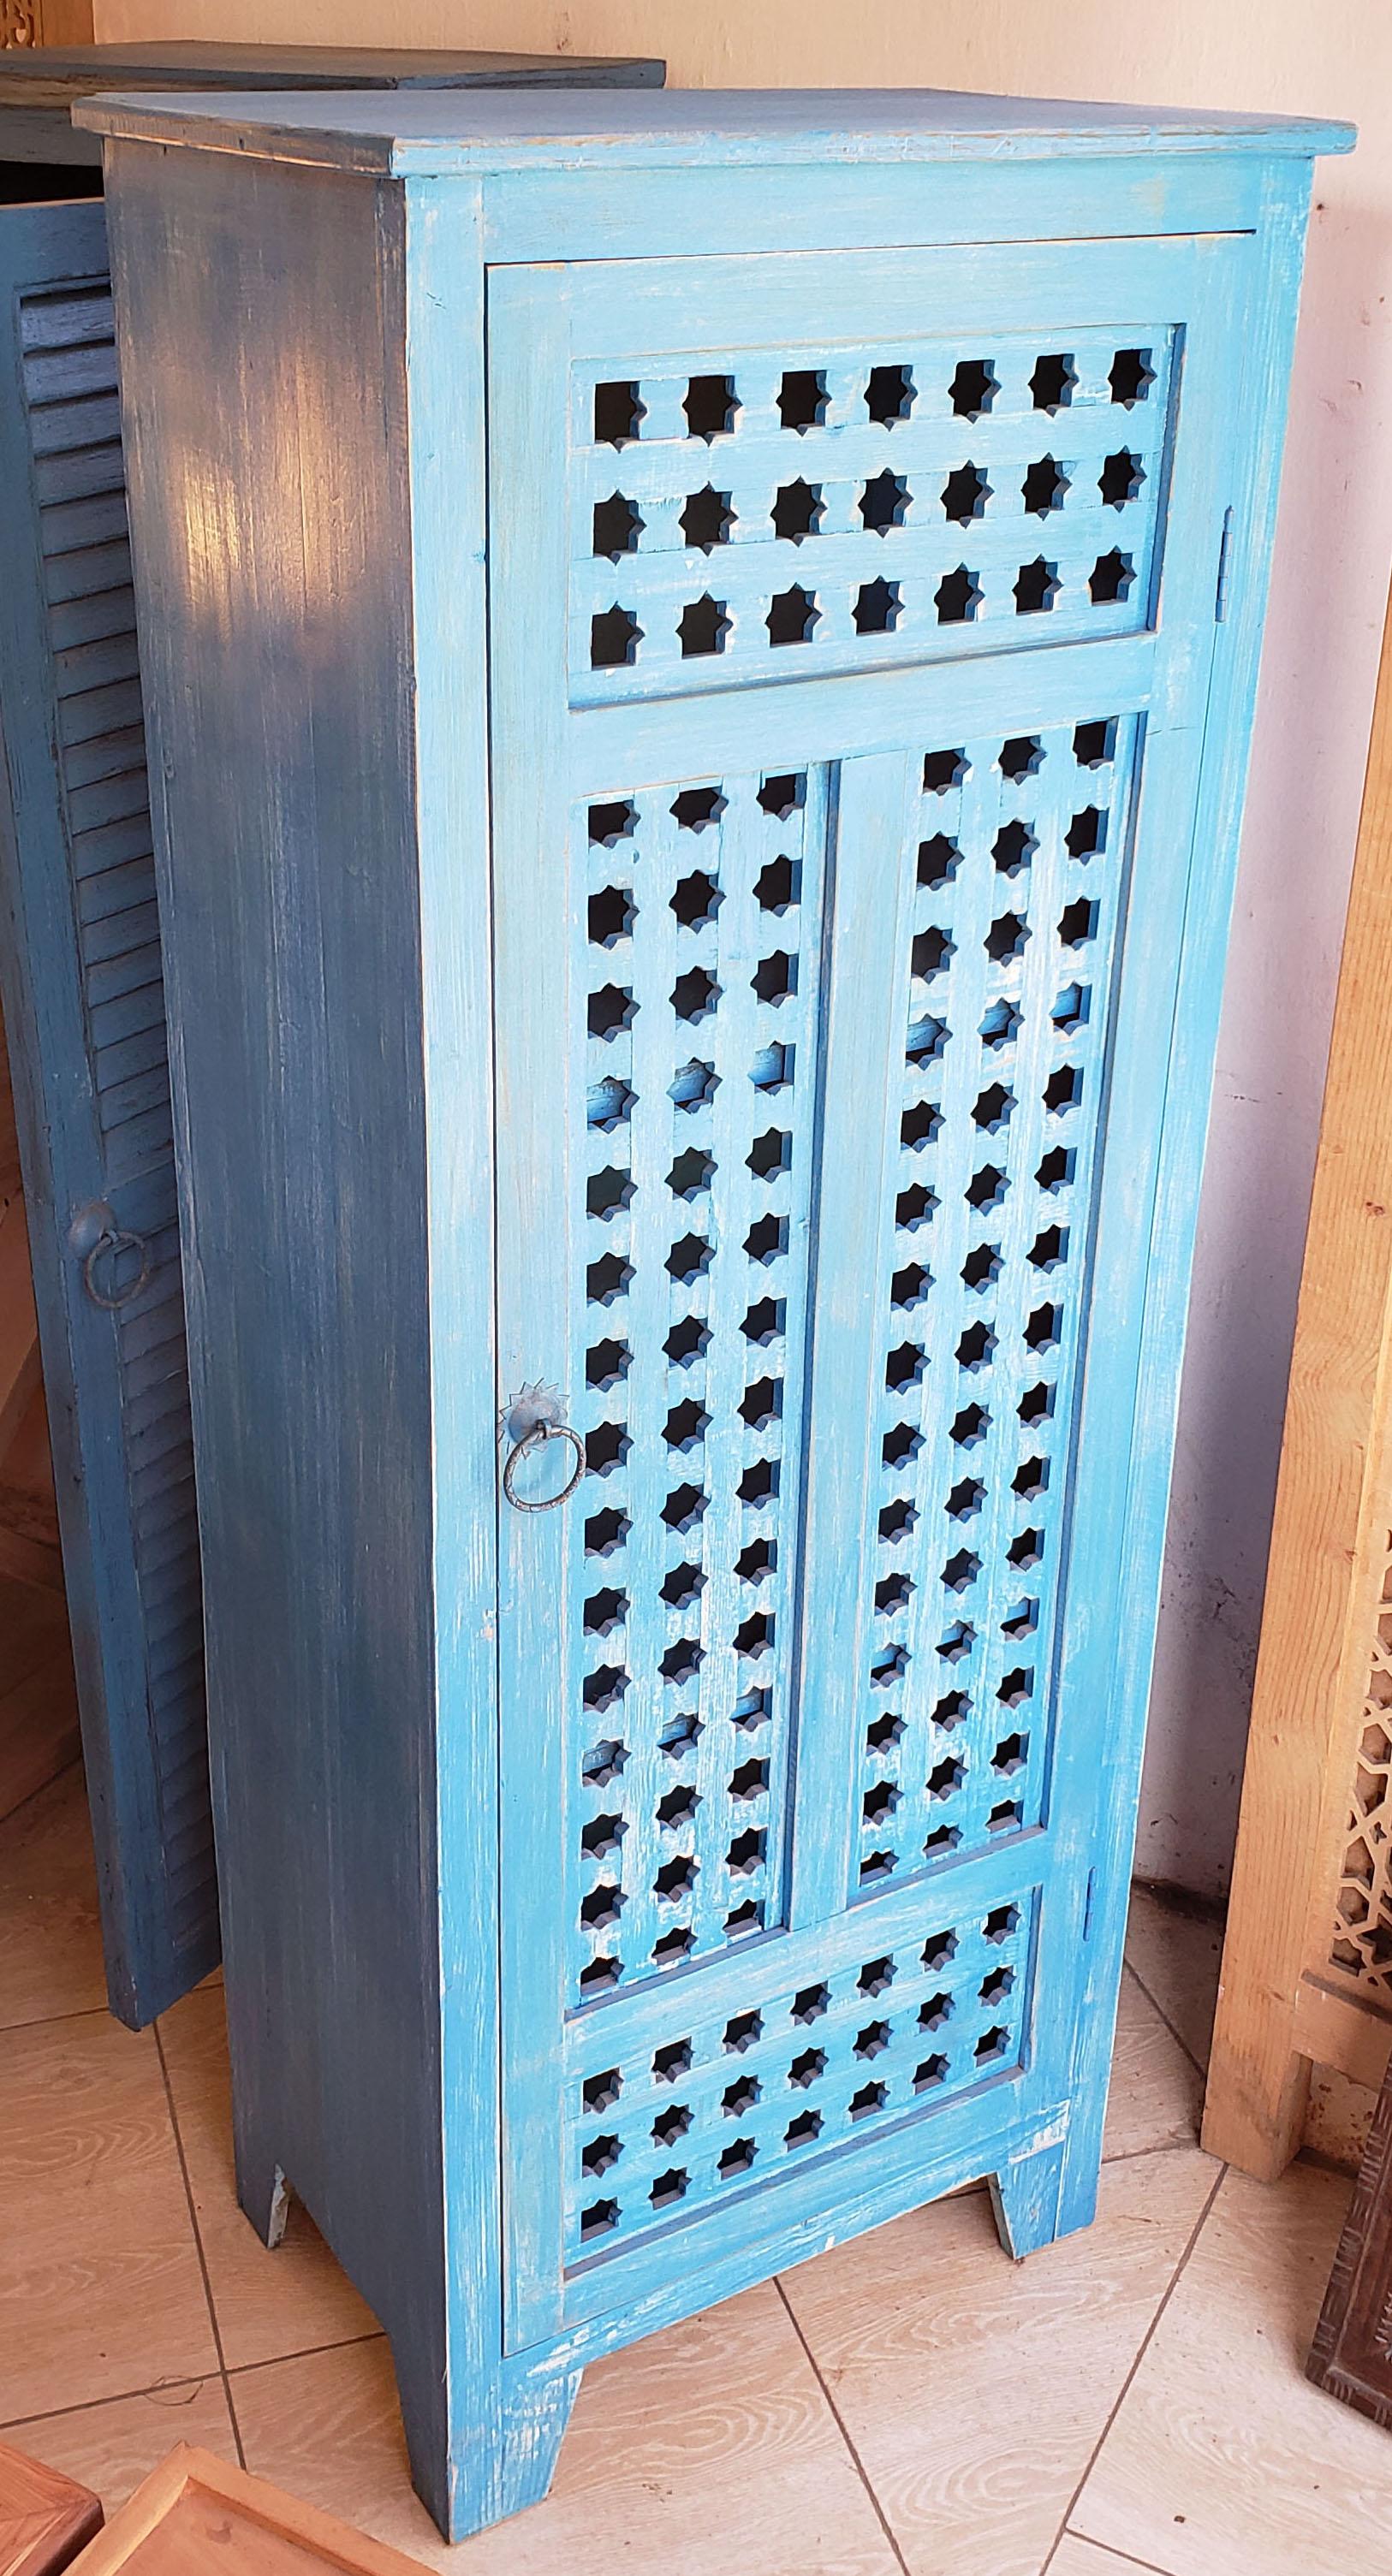 Contemporary Moroccan Carved Storage Cabinet, Old Blue Window Shutter For Sale